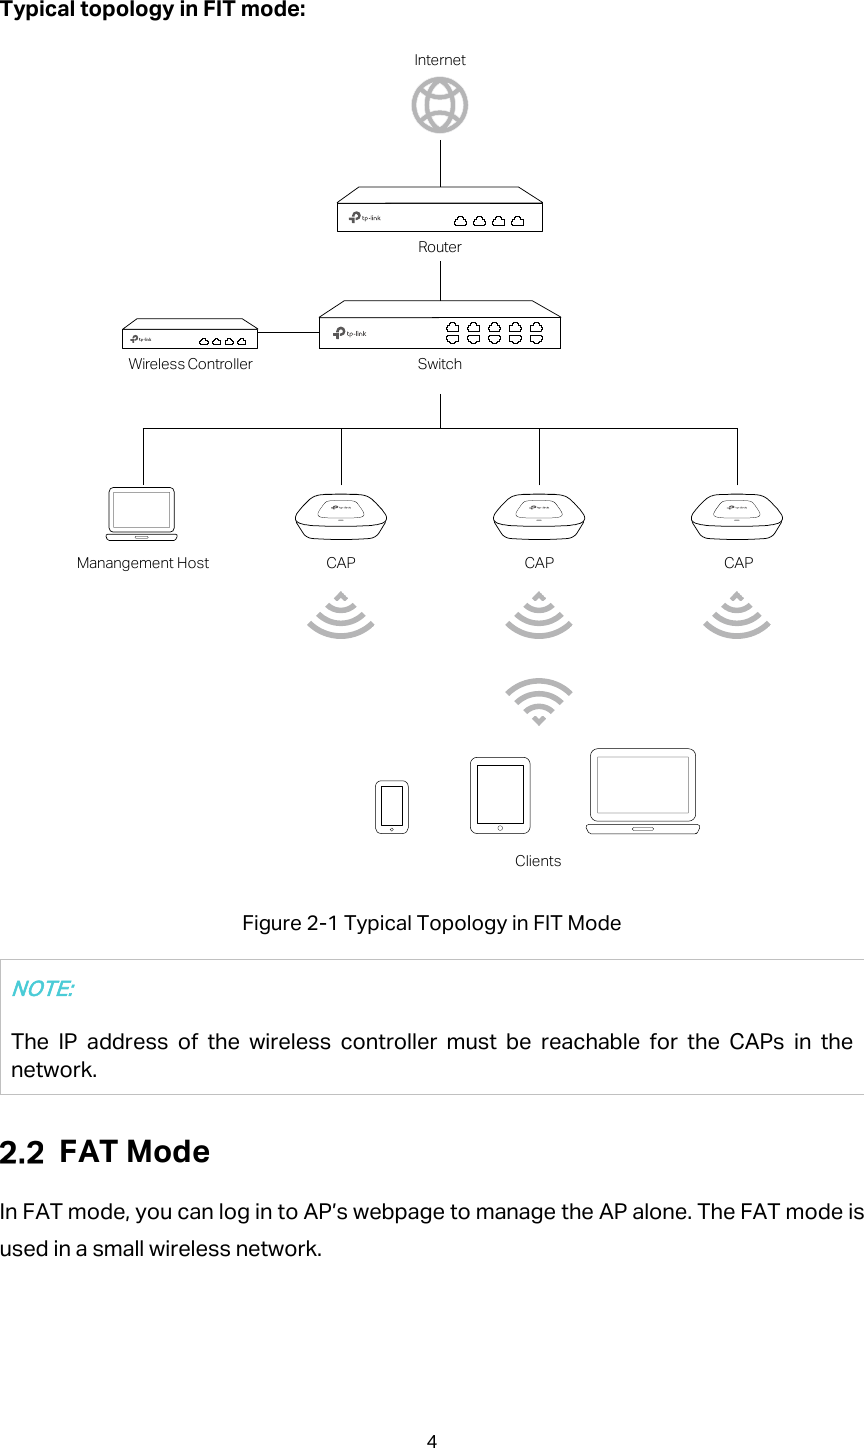 Typical topology in FIT mode:  Figure 2-1 Typical Topology in FIT Mode NOTE: The IP address of the wireless controller must be reachable for the CAPs in the network.  FAT Mode In FAT mode, you can log in to AP’s webpage to manage the AP alone. The FAT mode is used in a small wireless network. CAPWireless ControllerManangement HostClientsCAP CAPSwitchRouterInternet4  